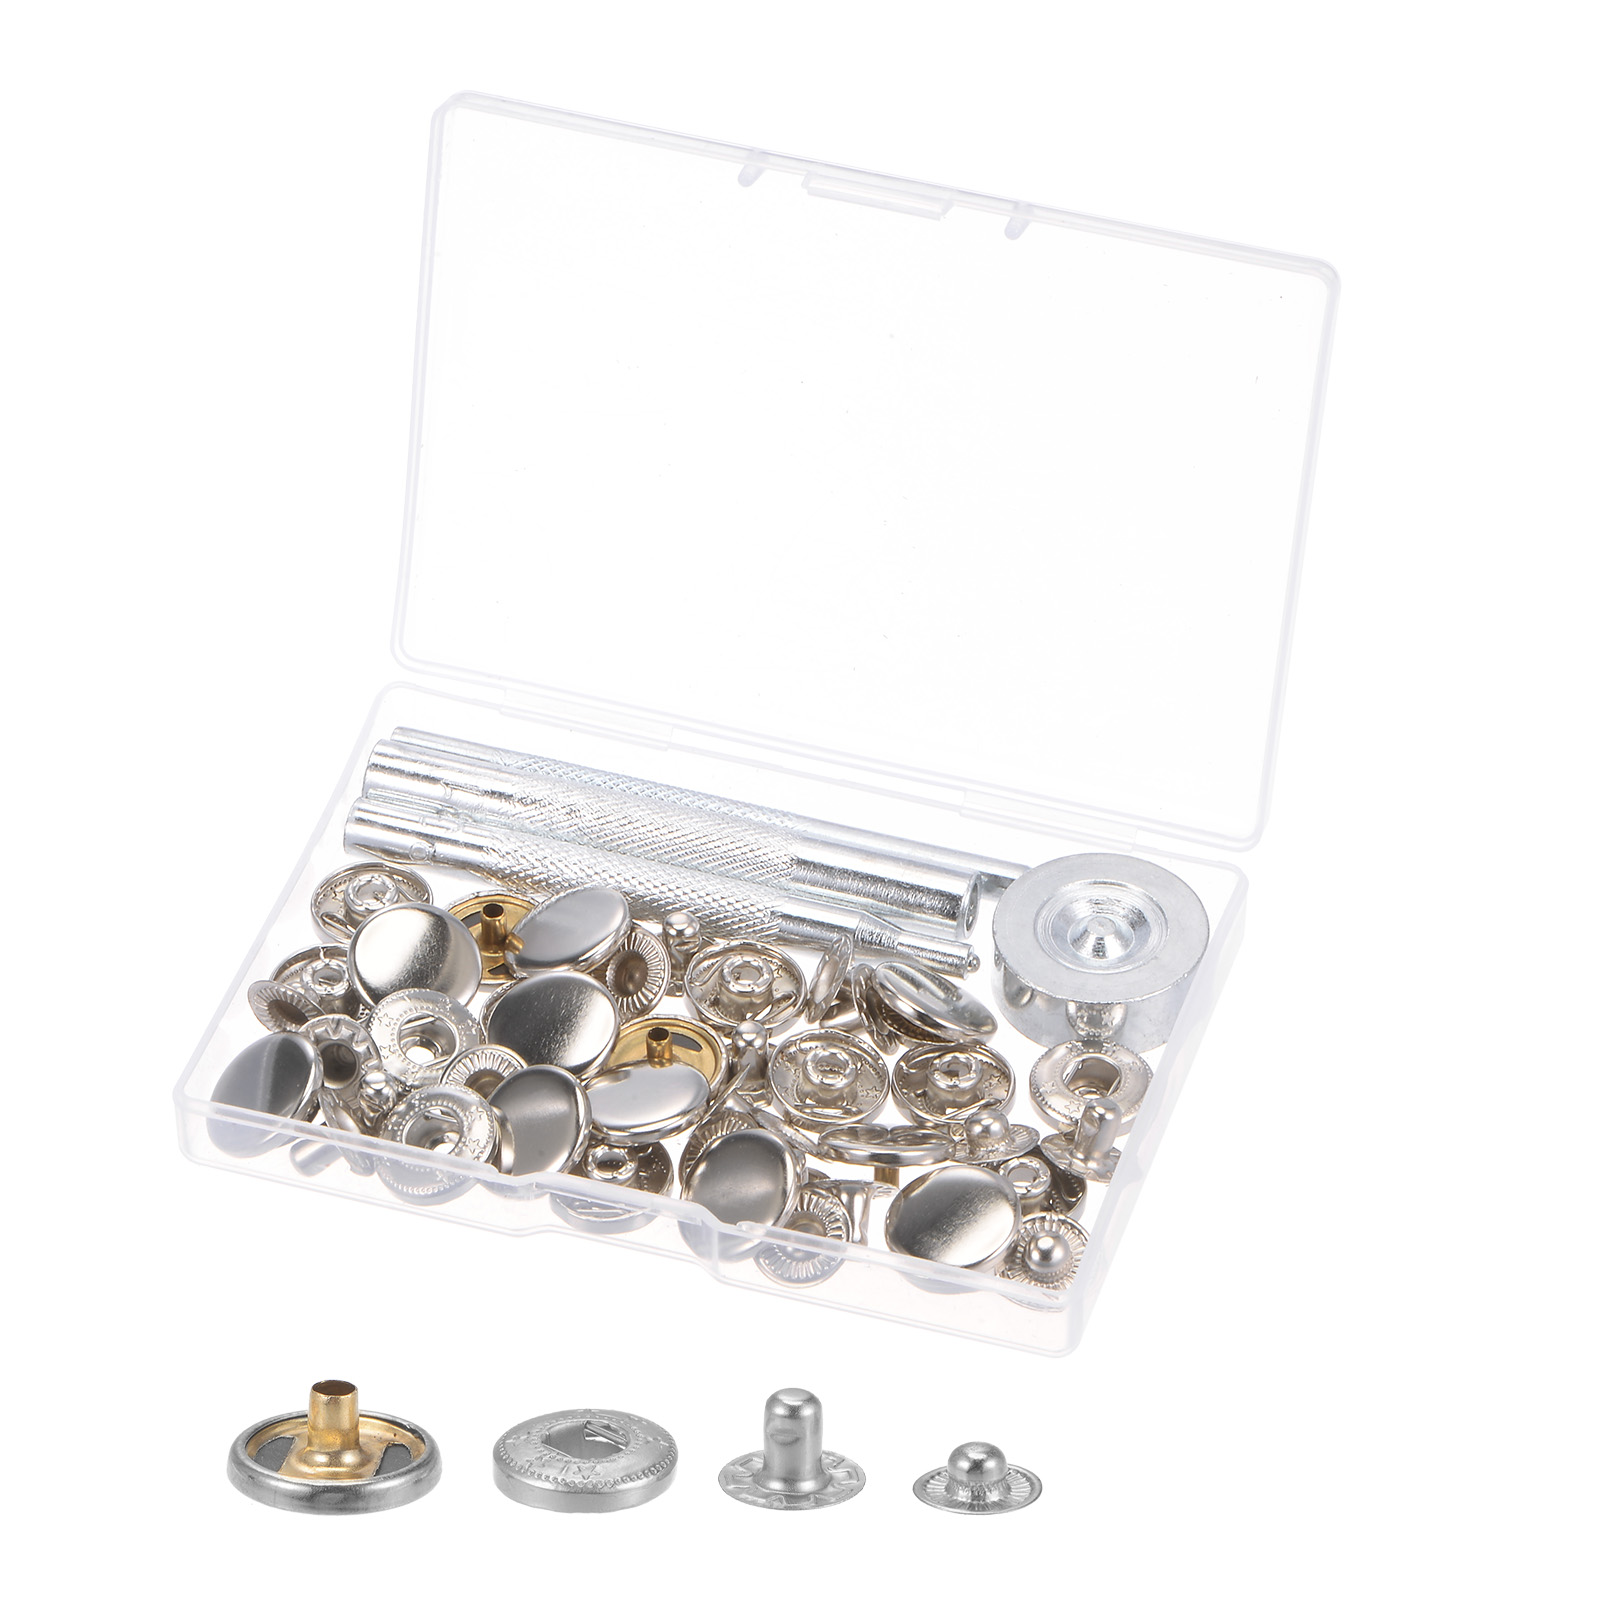 Unique Bargains 12 Sets Snap Fasteners Kit Copper with 4 Setter Tools for Clothing Silver Tone